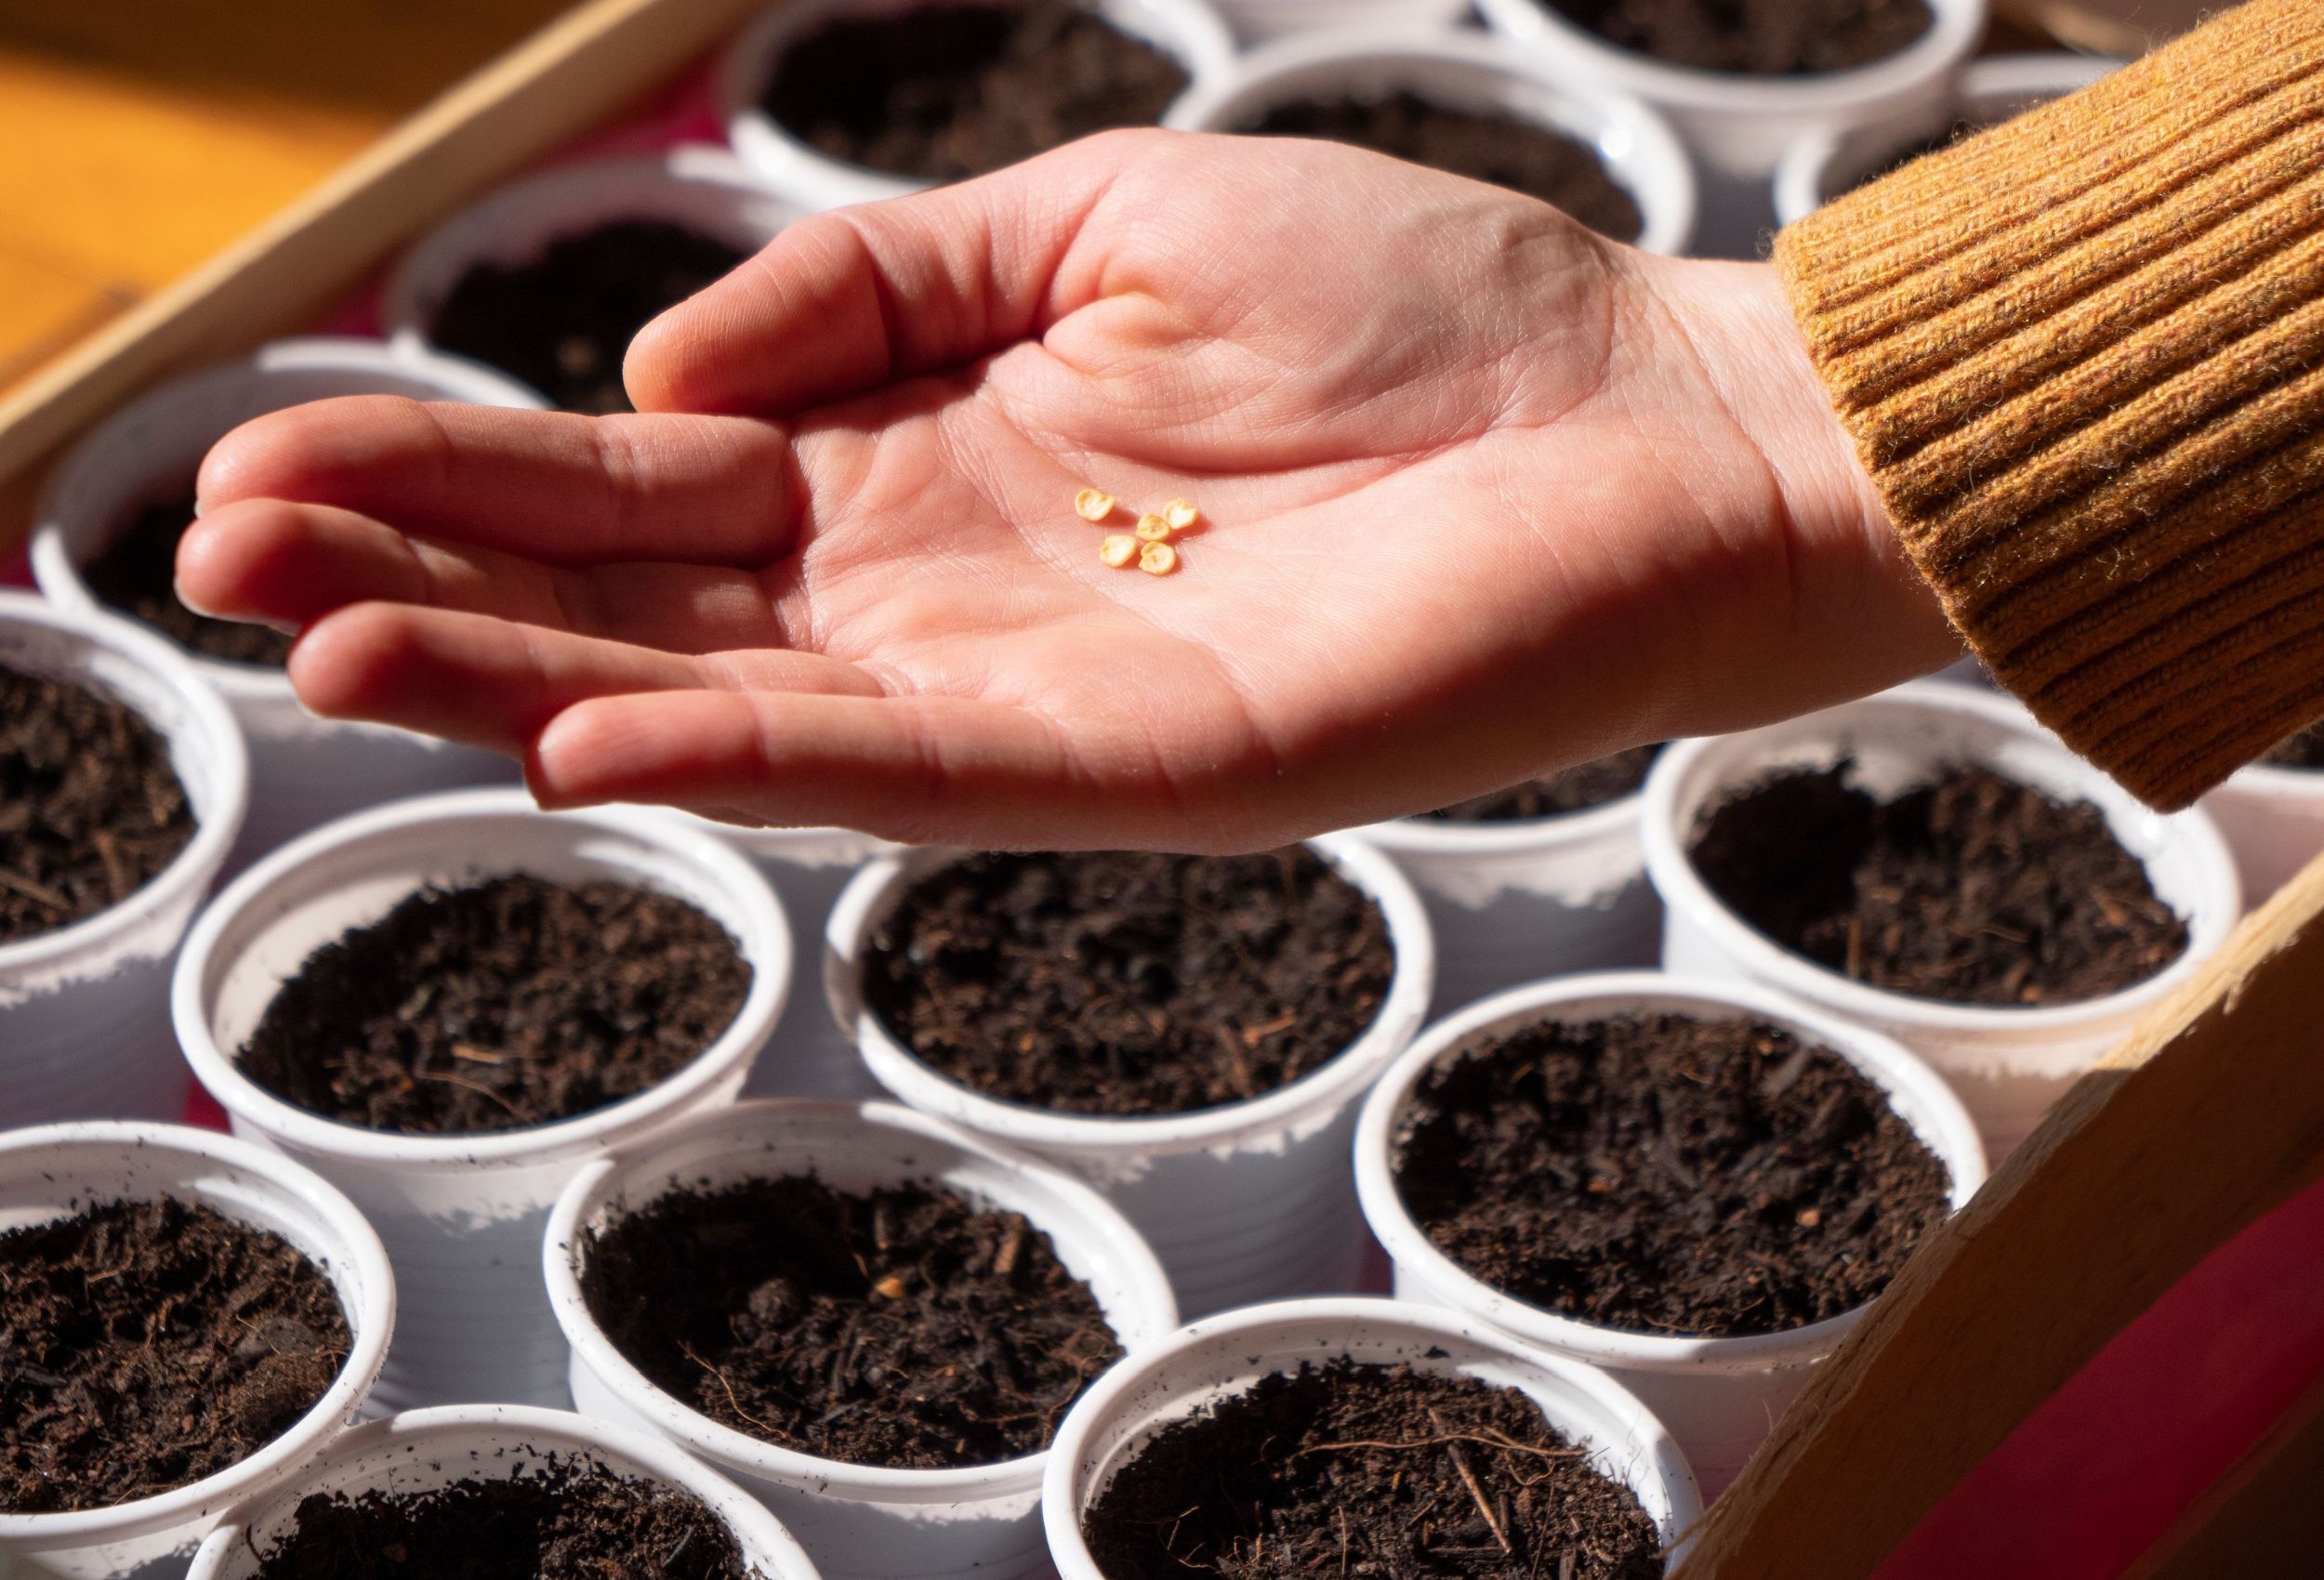 Woman hand holds seeds in hand, close up. Planting seeds. Gardening, sowing seeds in pots. Sow chili peppers.